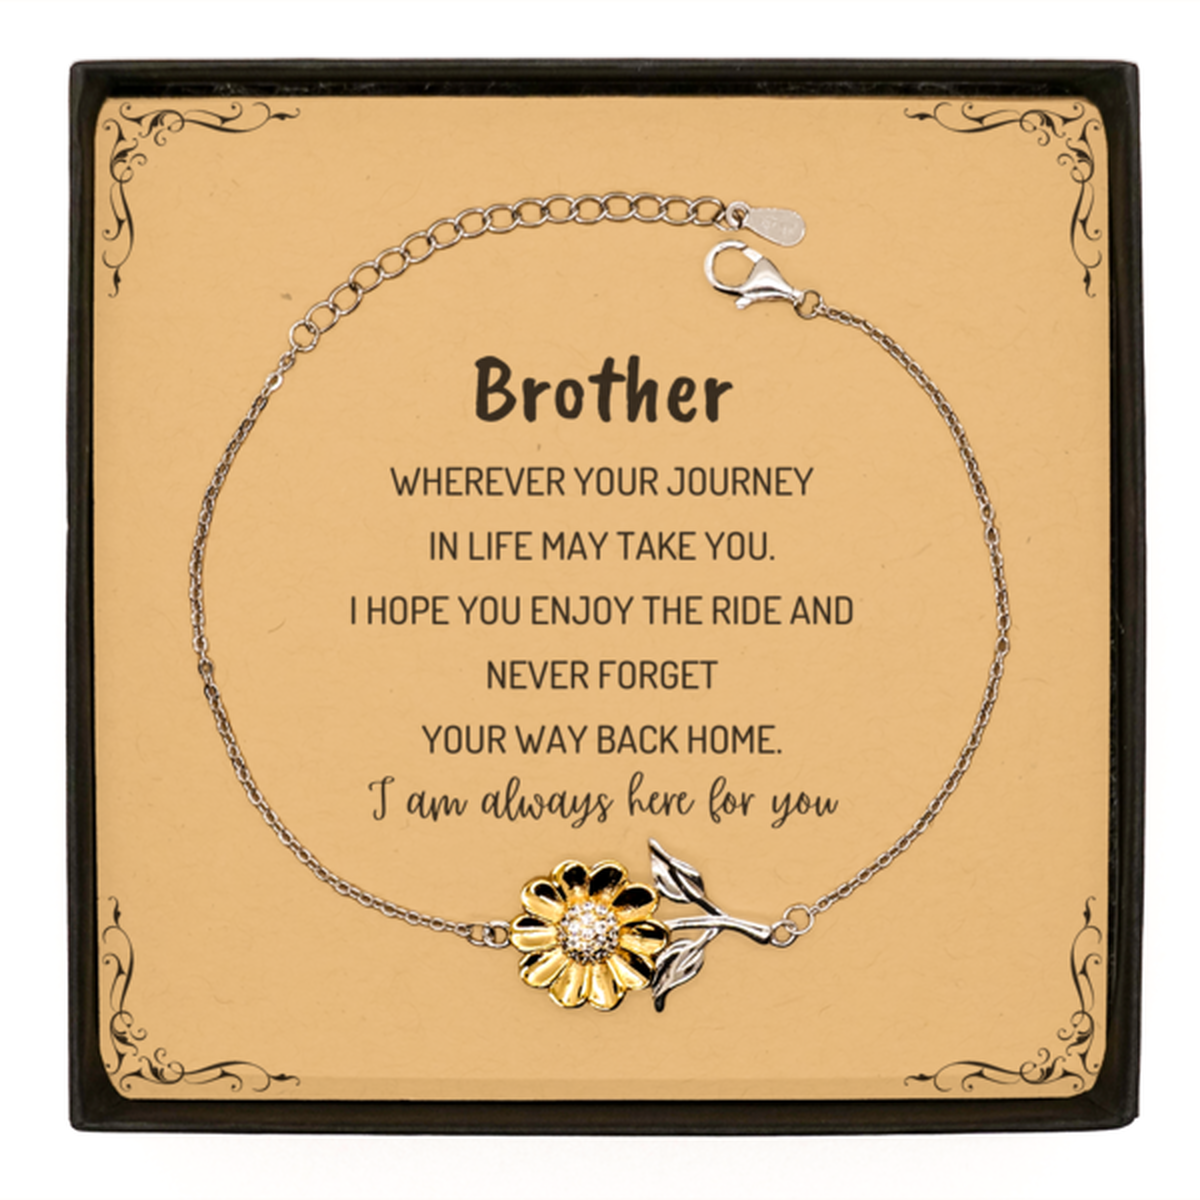 Brother wherever your journey in life may take you, I am always here for you Brother Sunflower Bracelet, Awesome Christmas Gifts For Brother Message Card, Brother Birthday Gifts for Men Women Family Loved One